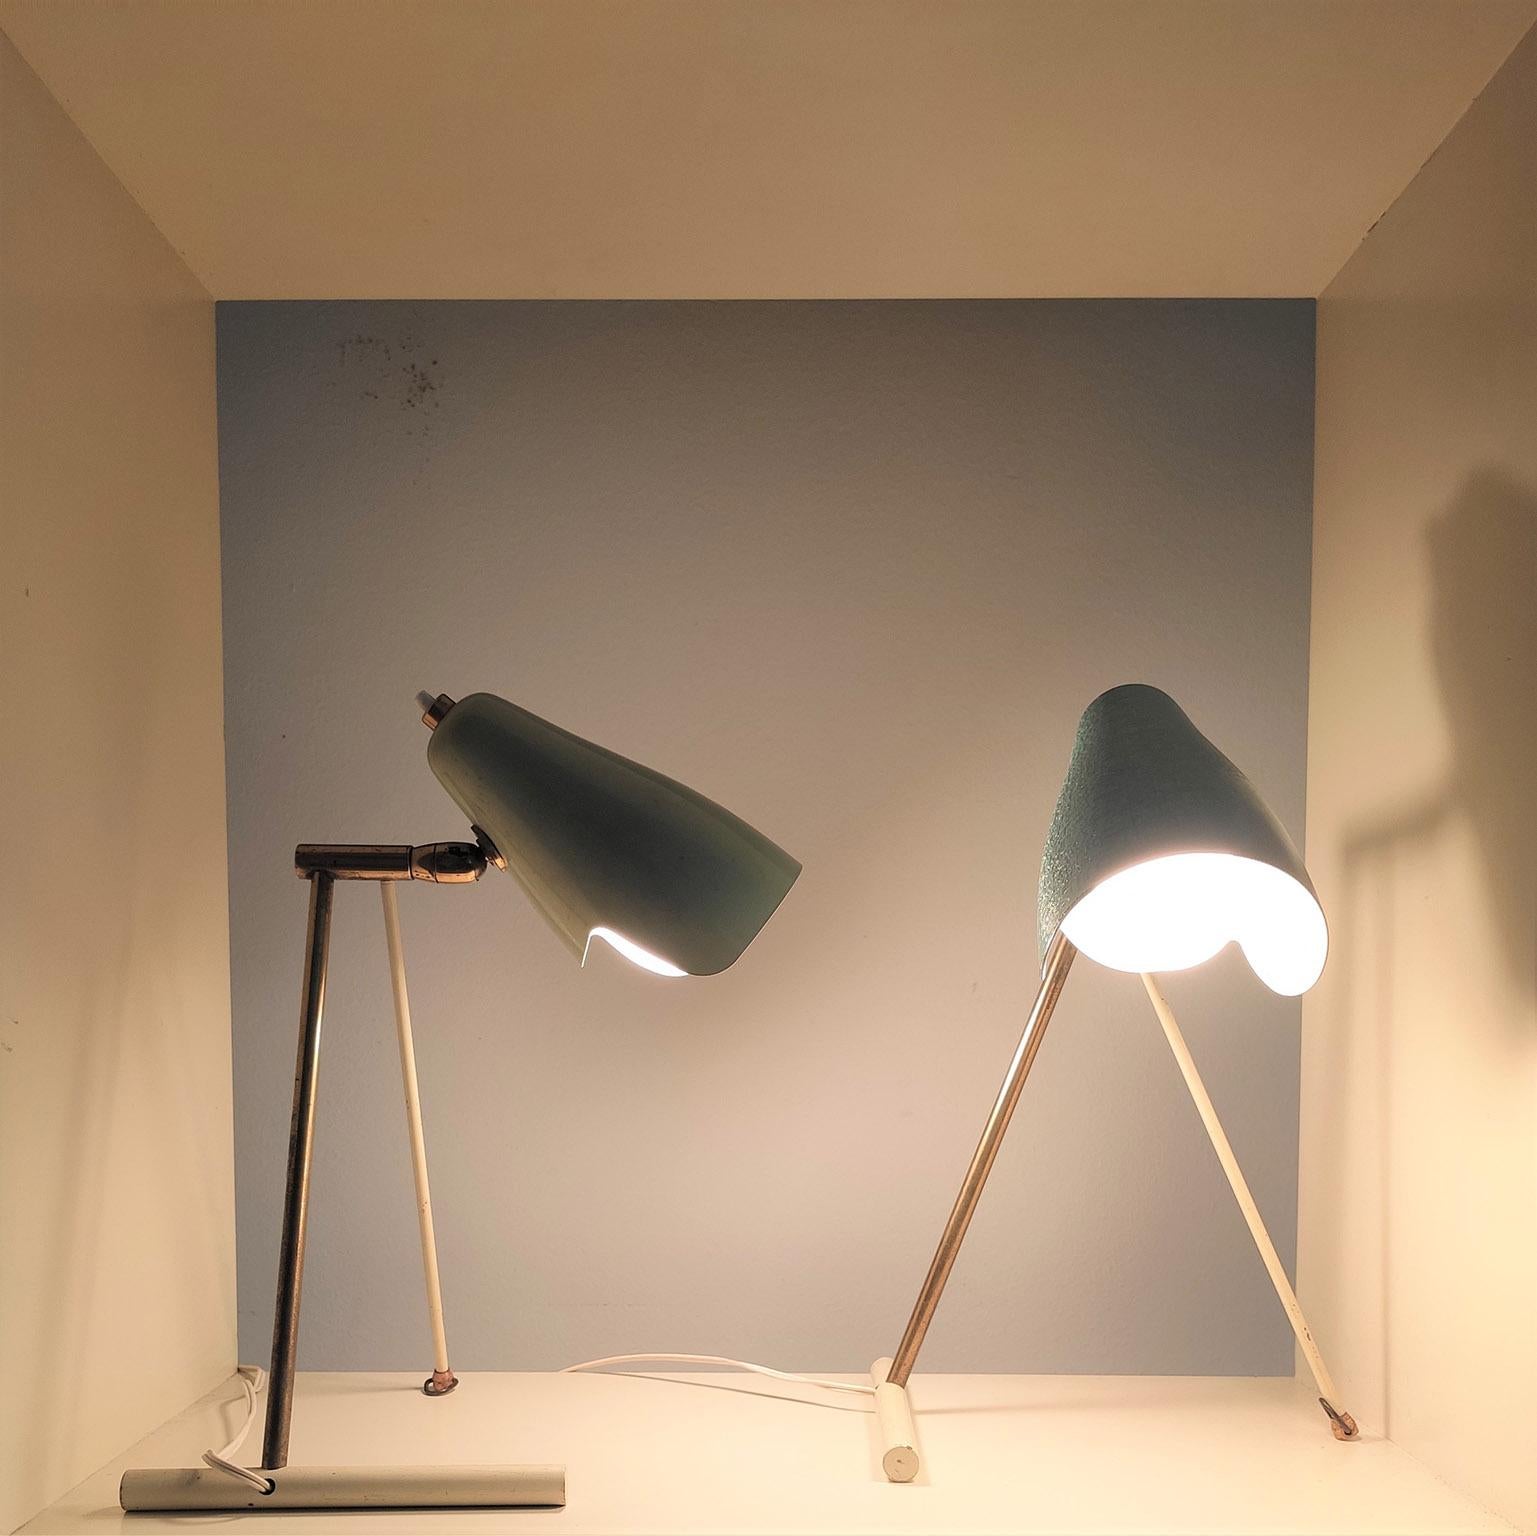 Rare pair of table and /or wall lamps manufactured and Disegned by Stilnovo in the 1950s , the Brass stem support adjustable reflectors in light green lacquered and Light Blue.

It can be hanged to the wall as simply used on a table.
General very